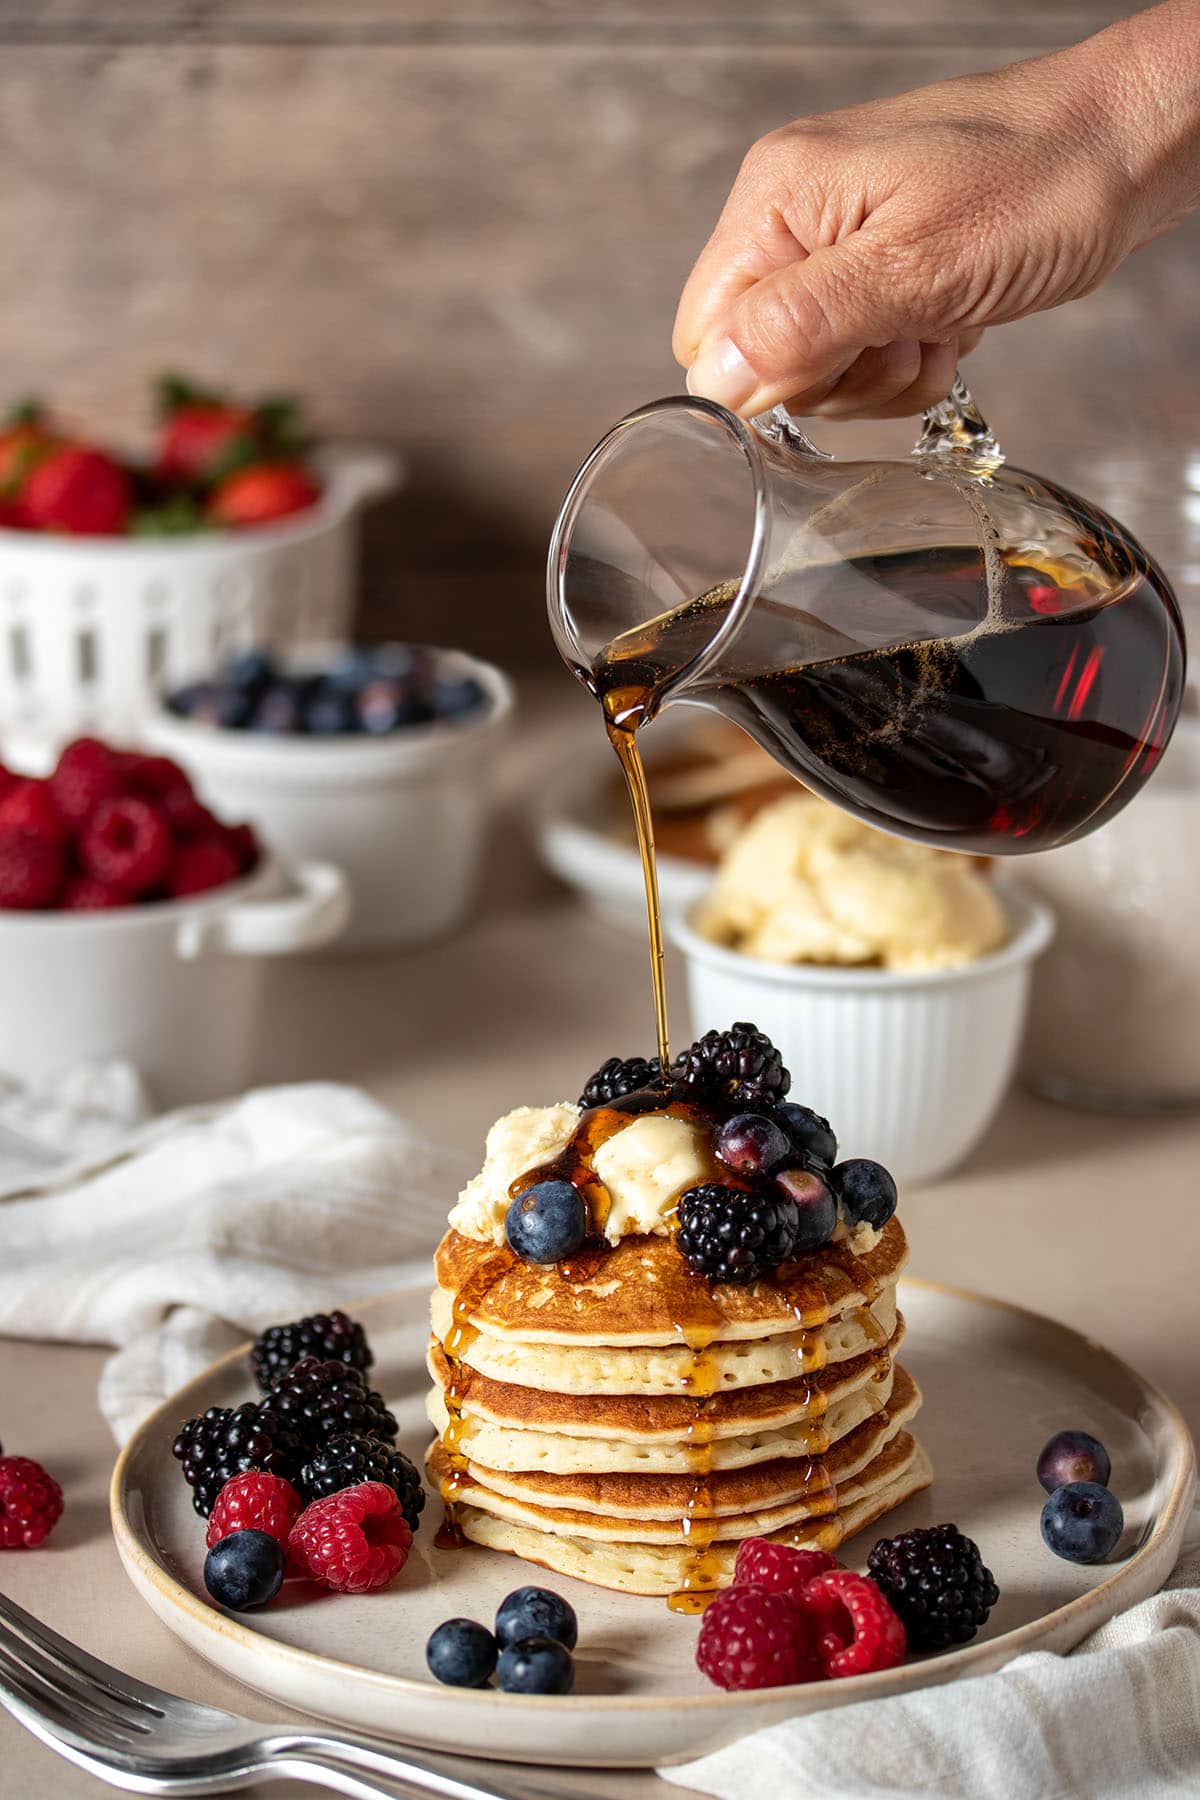 A hand pouring maple syrup from a glass container over a stack of pancakes with berries and butter.